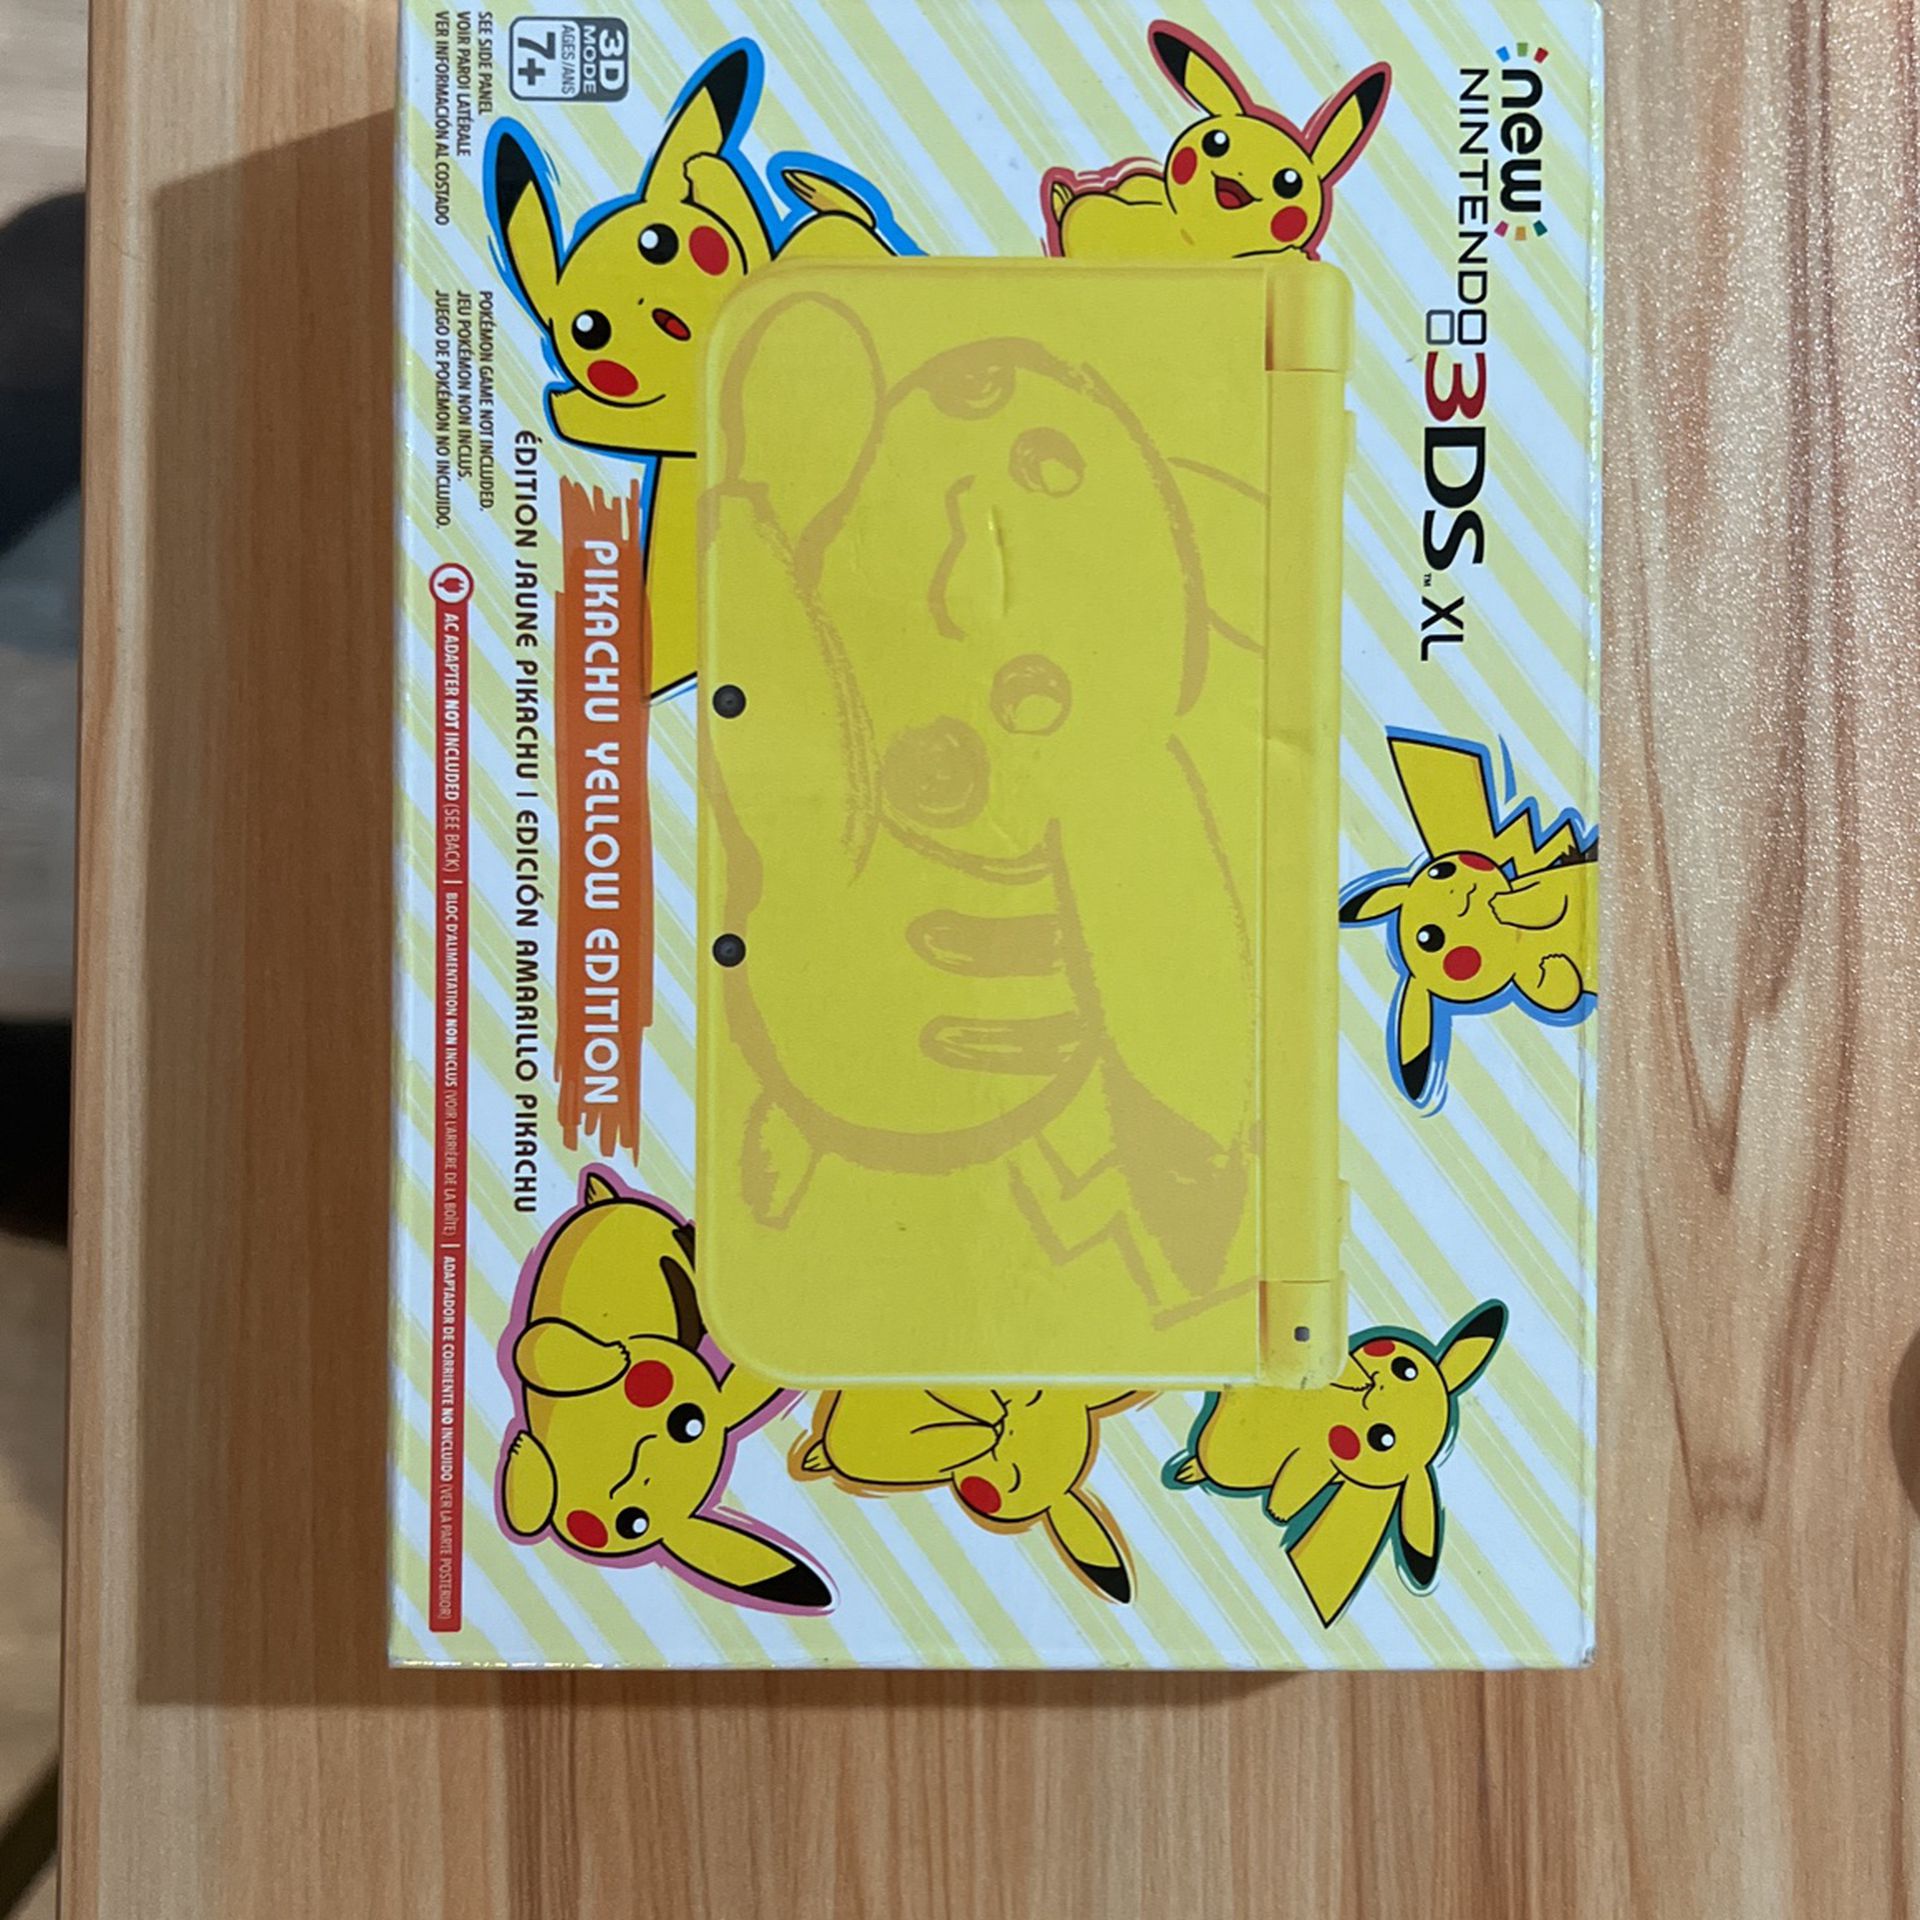 NEW Nintendo 3DS XL (NEVER OPENED)